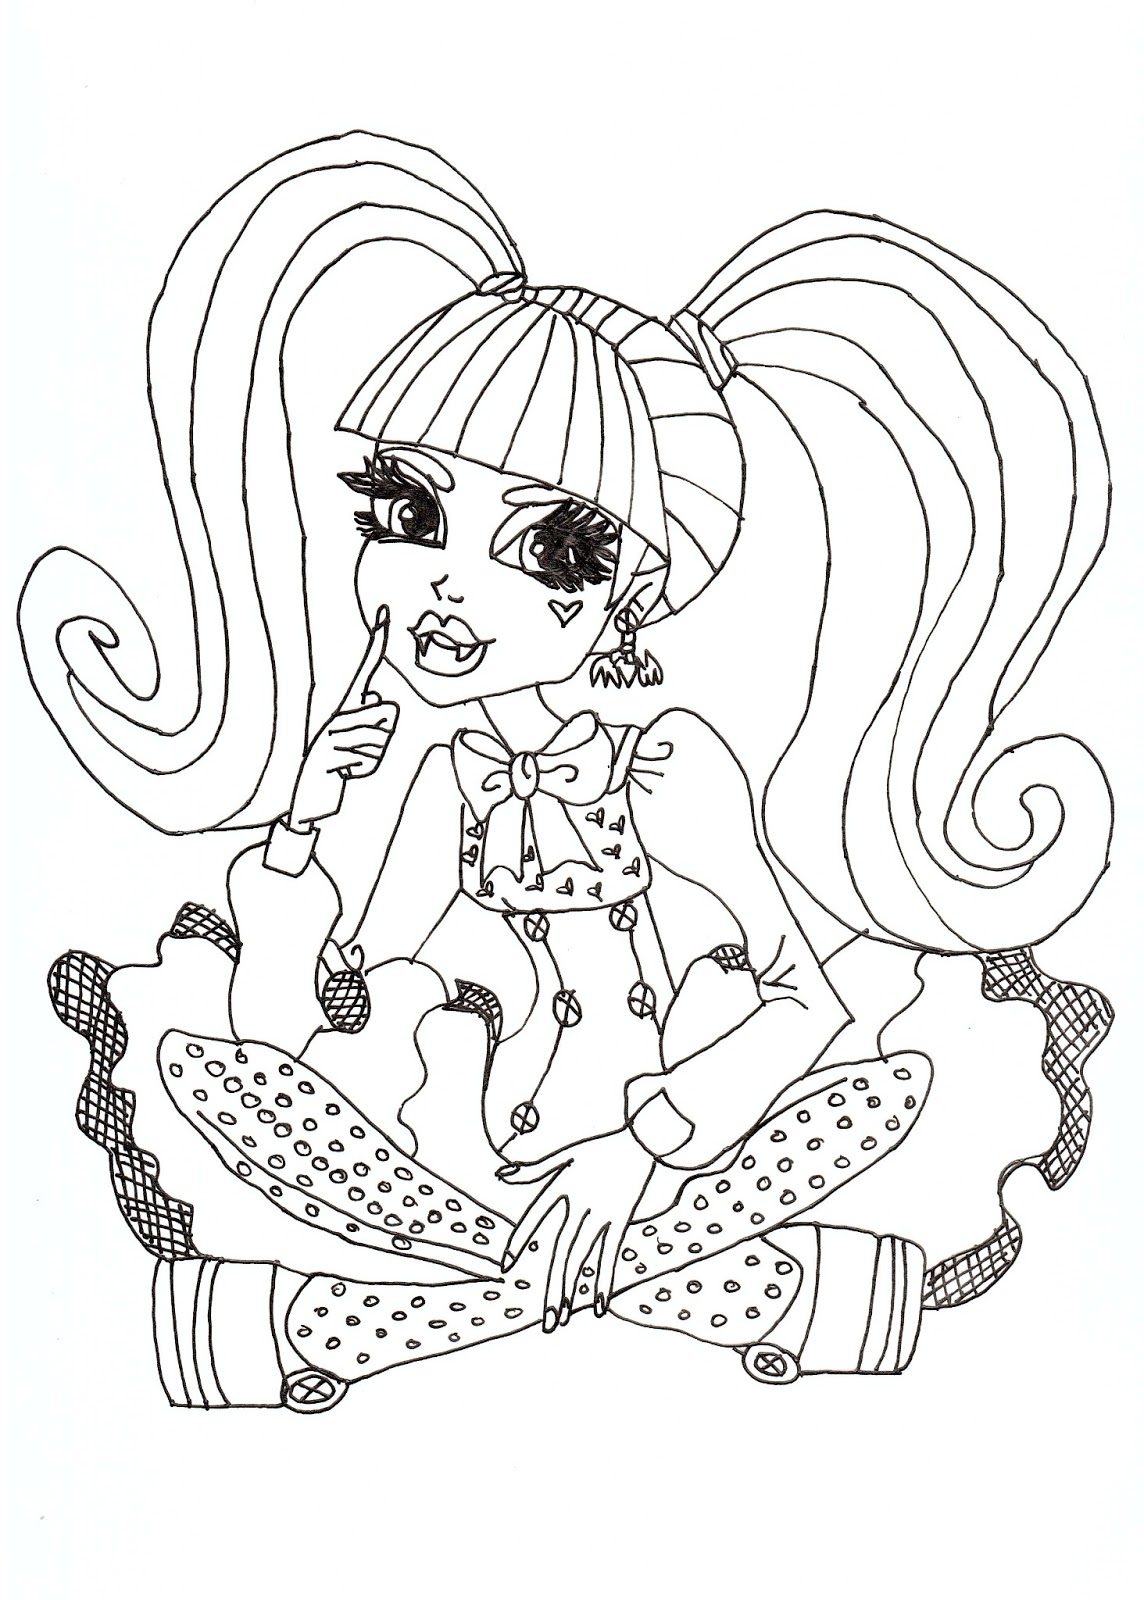 Free Printable Monster High Coloring Pages: Monster High Draculaura